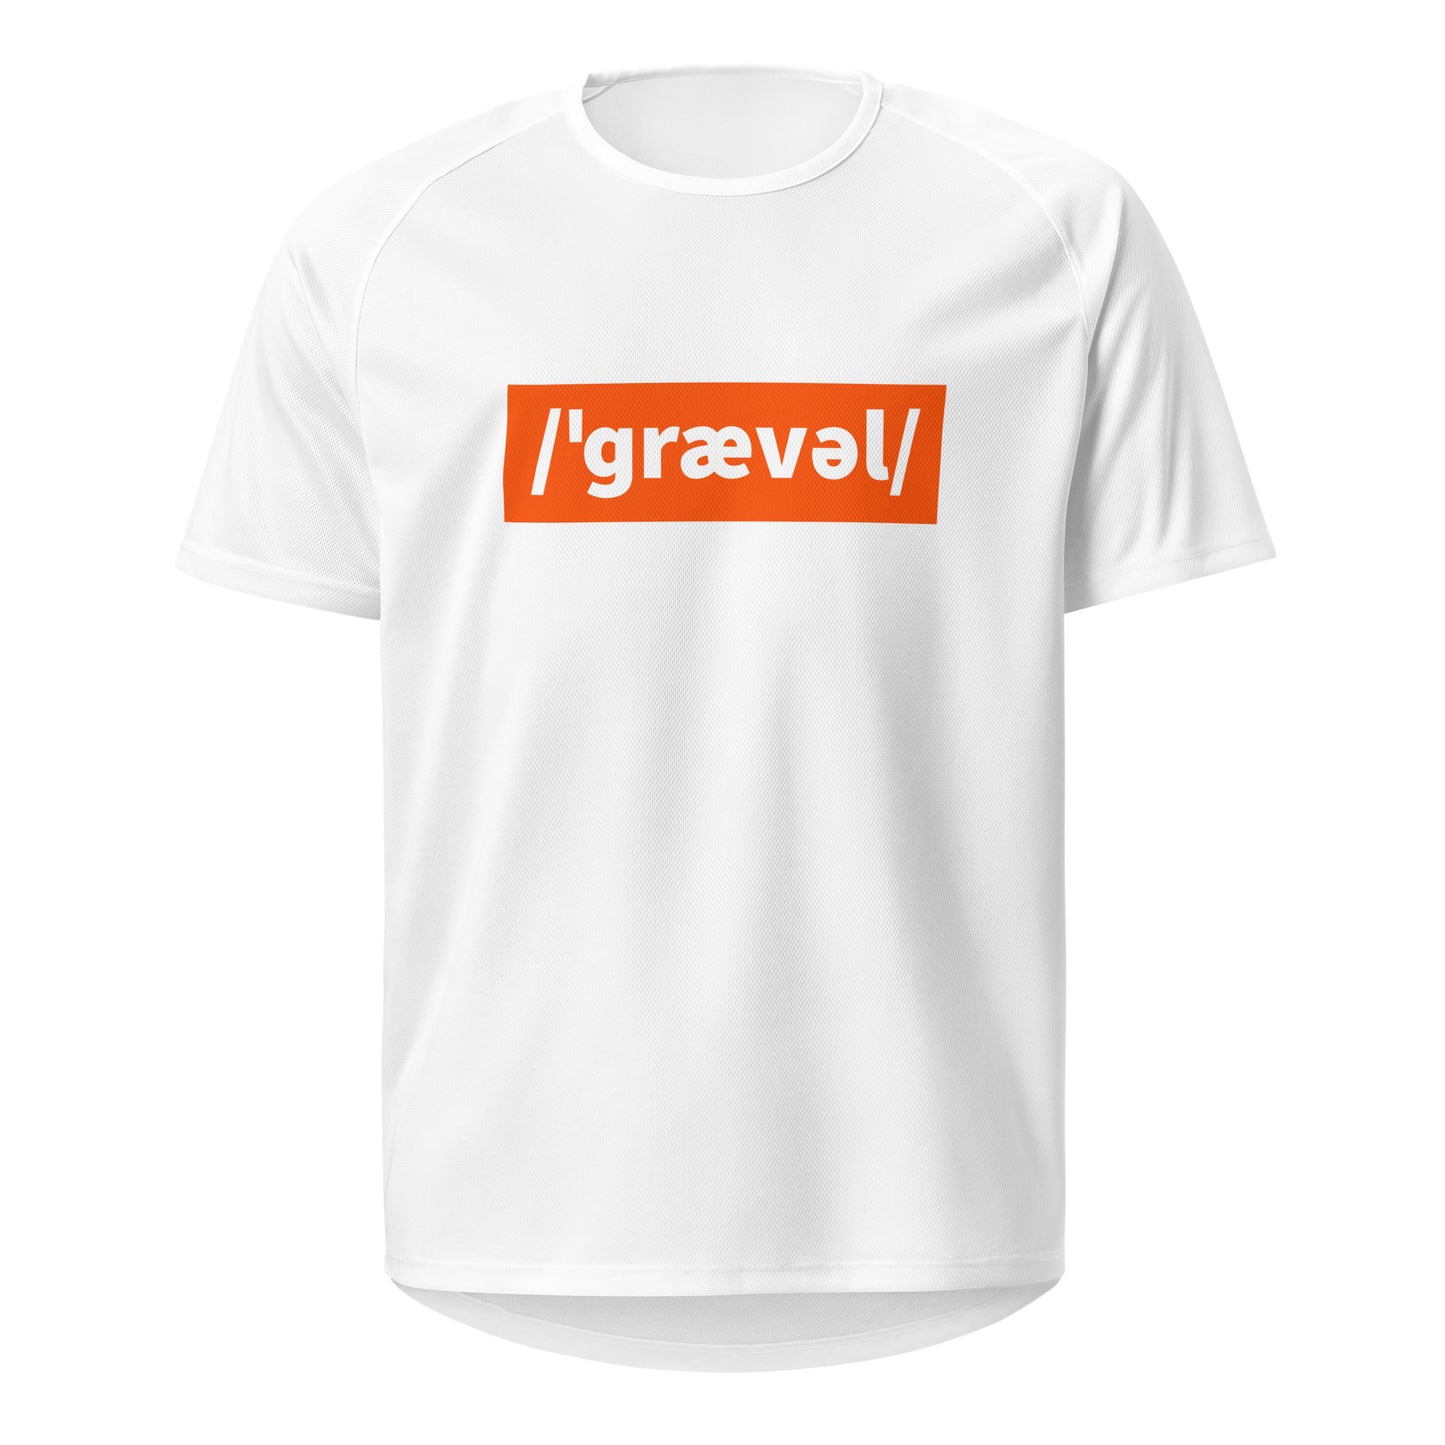 Gravel Cycling Sports Jersey, Adult